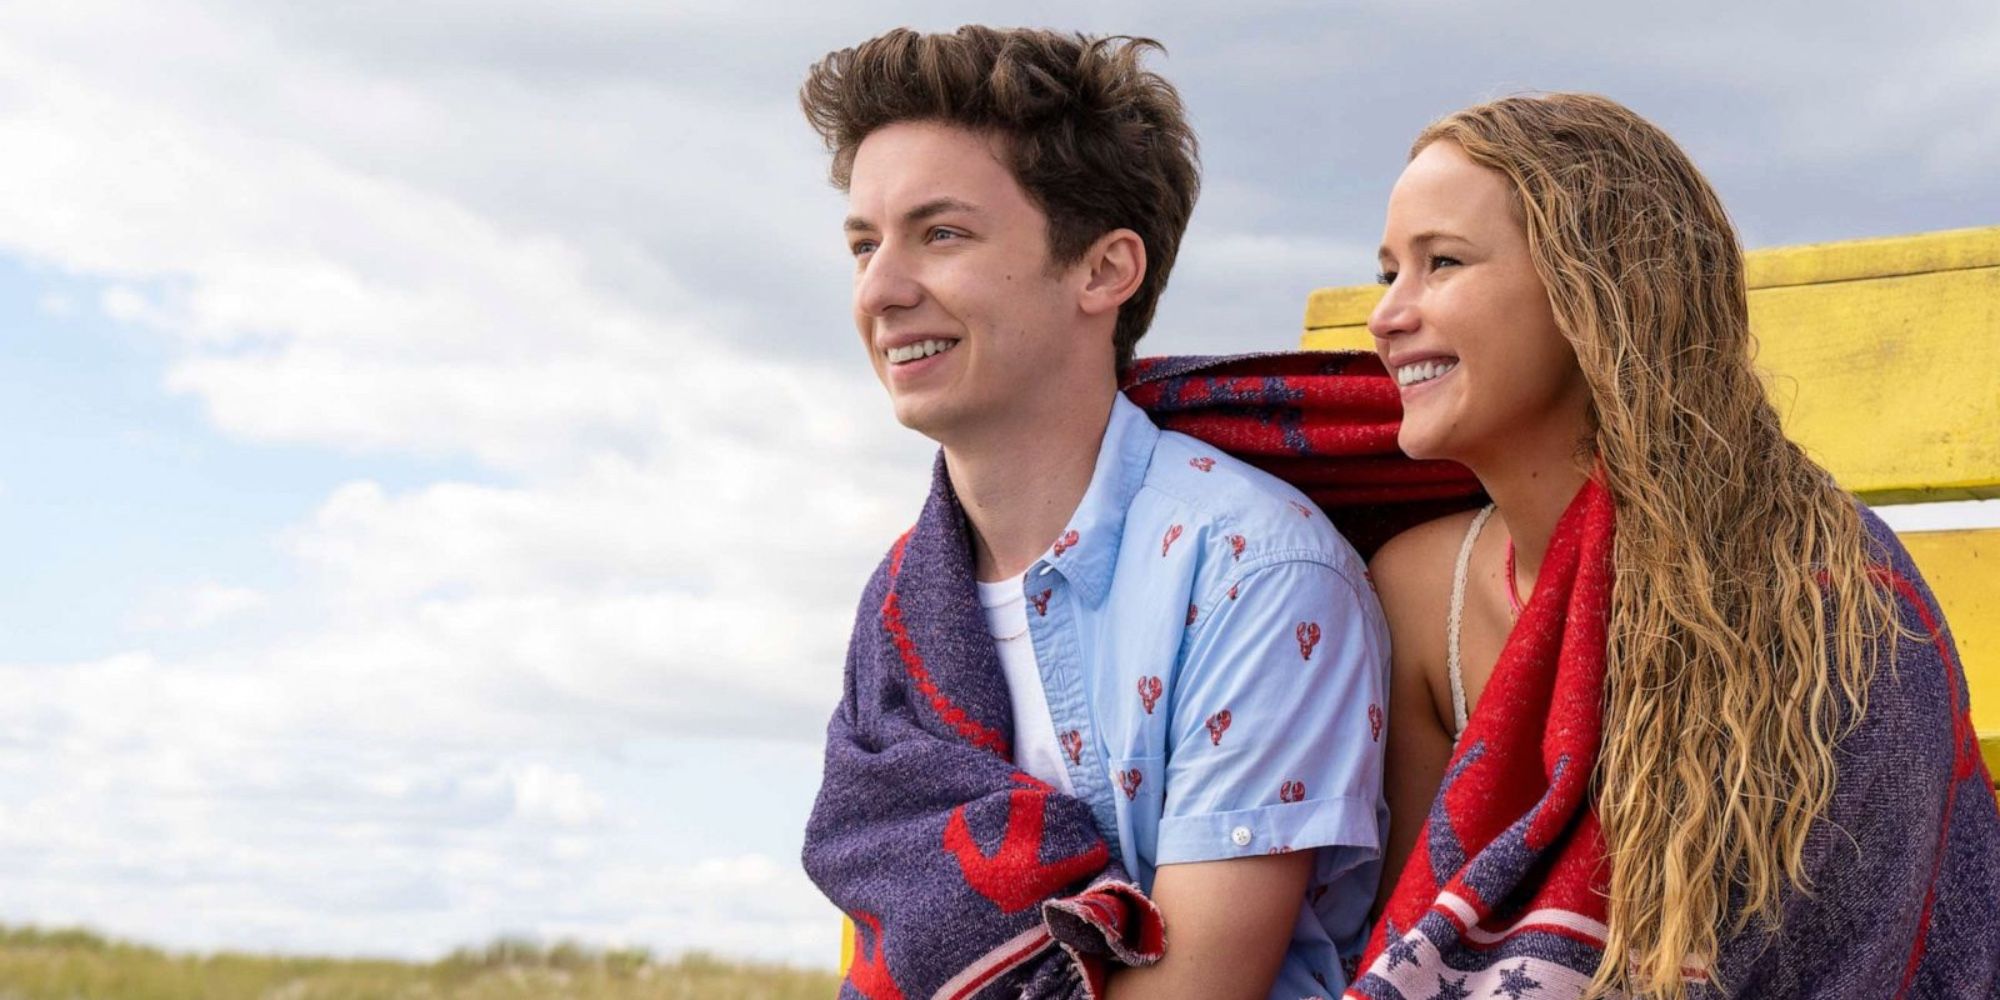 Maddie (Jennifer Lawrence) and Percy (Andrew Barth Feldman) have a towel around them, while they sit at the beach in No Hard Feelings.